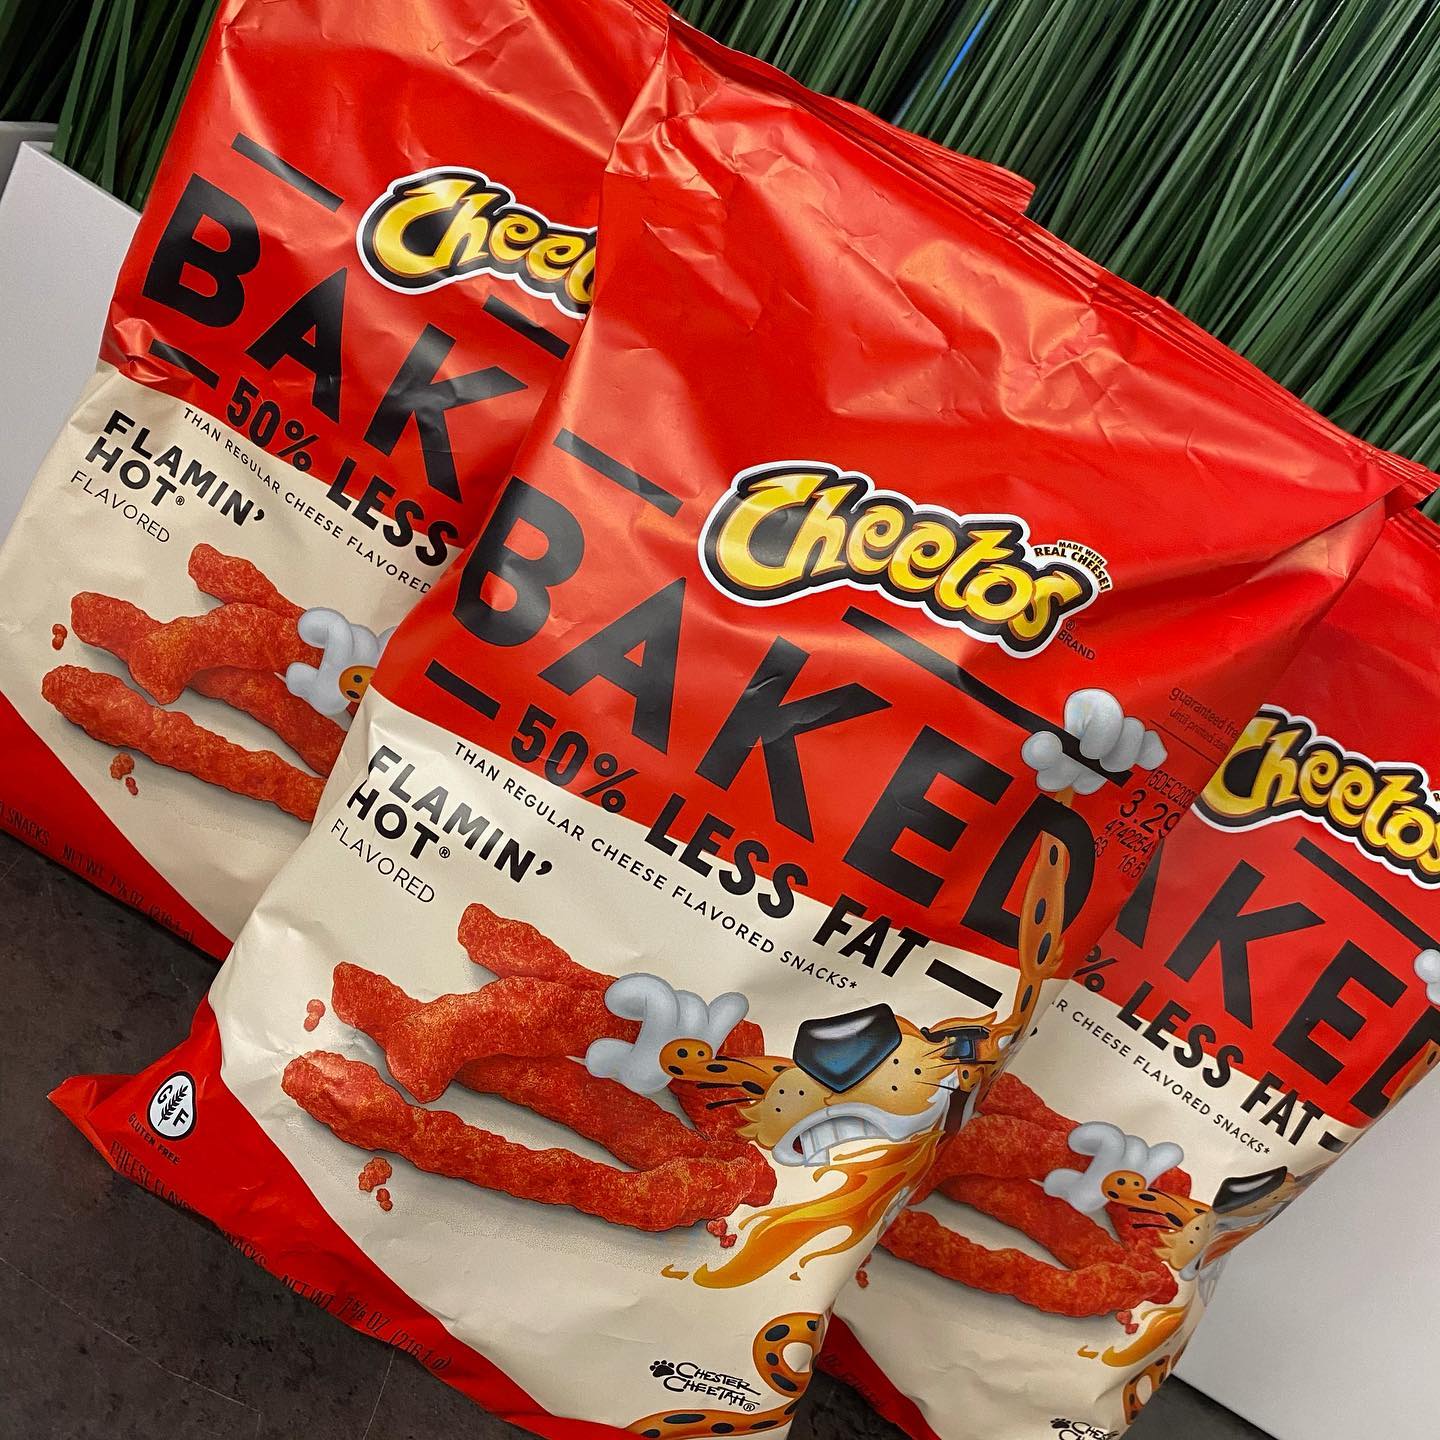 11 Baked Cheetos Nutrition Facts - Facts.net